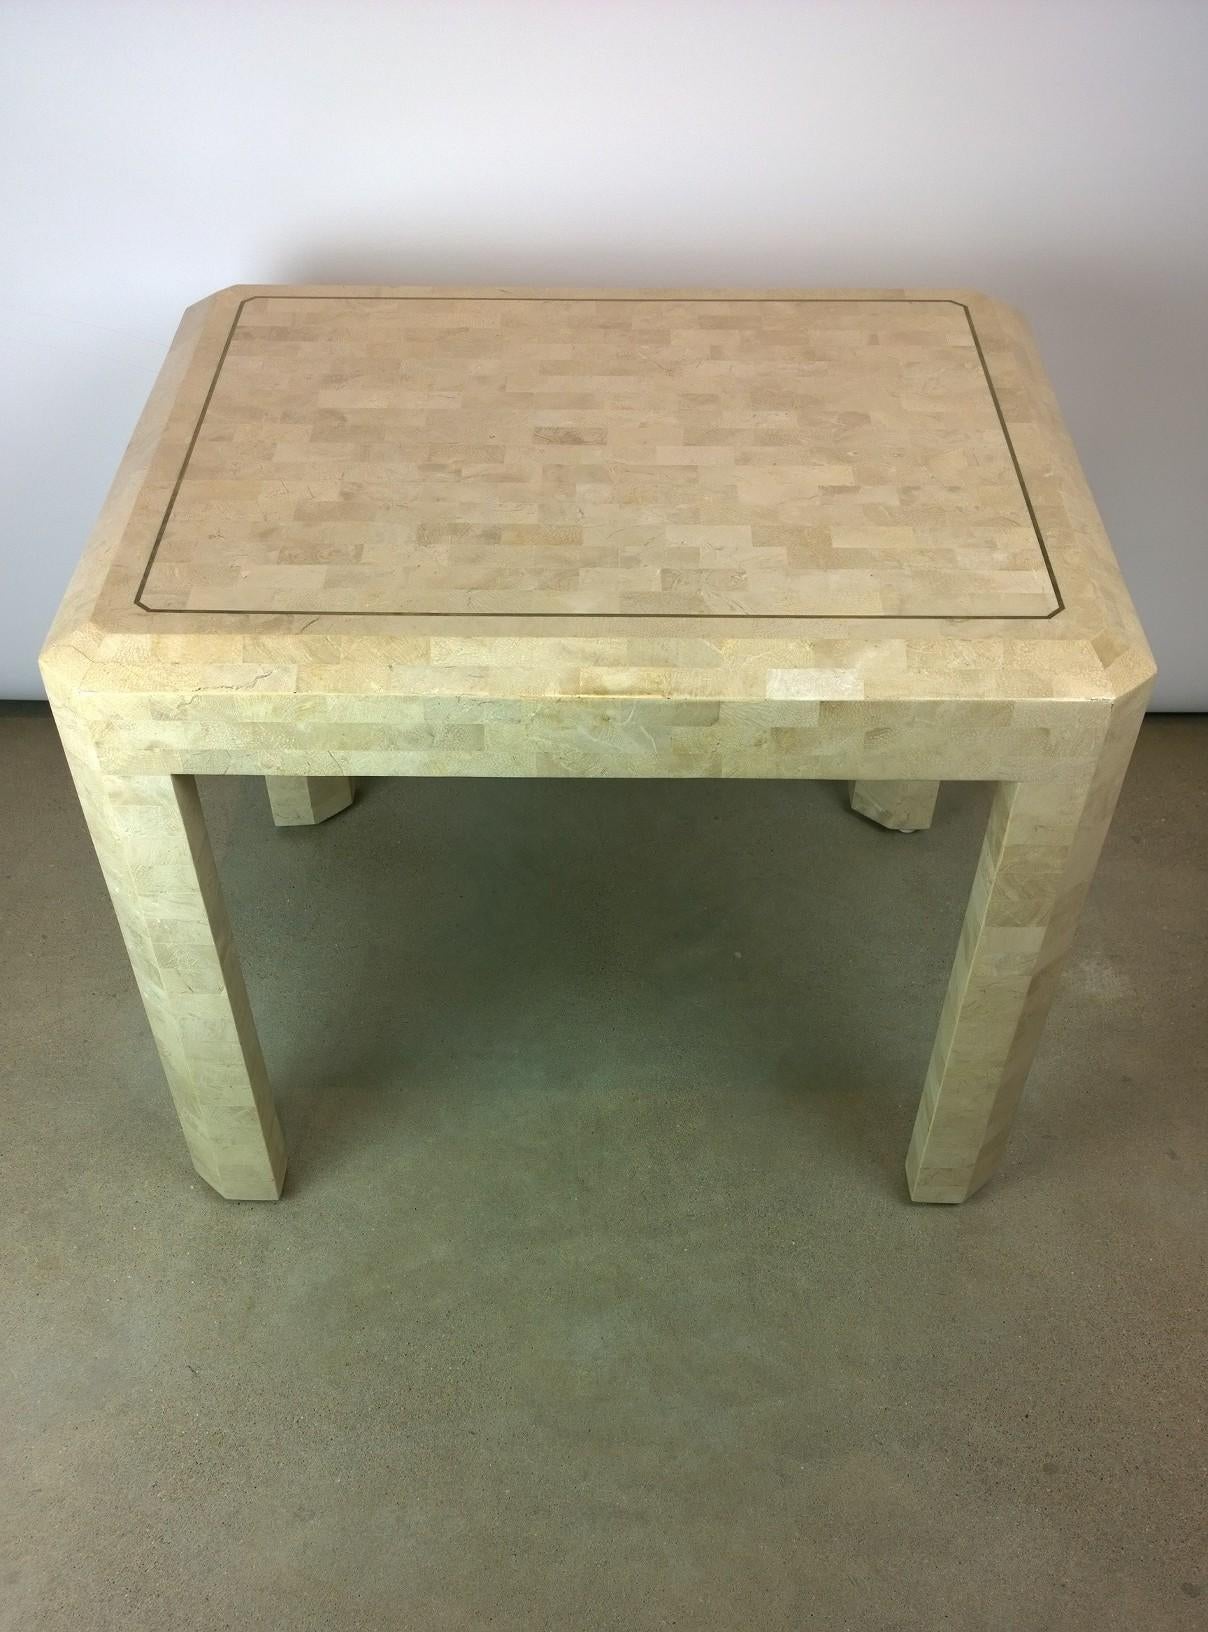 2 Maitland-Smith Ivory & Tan Tessellated Fossil w/ Inlaid Brass Band Side Tables For Sale 7